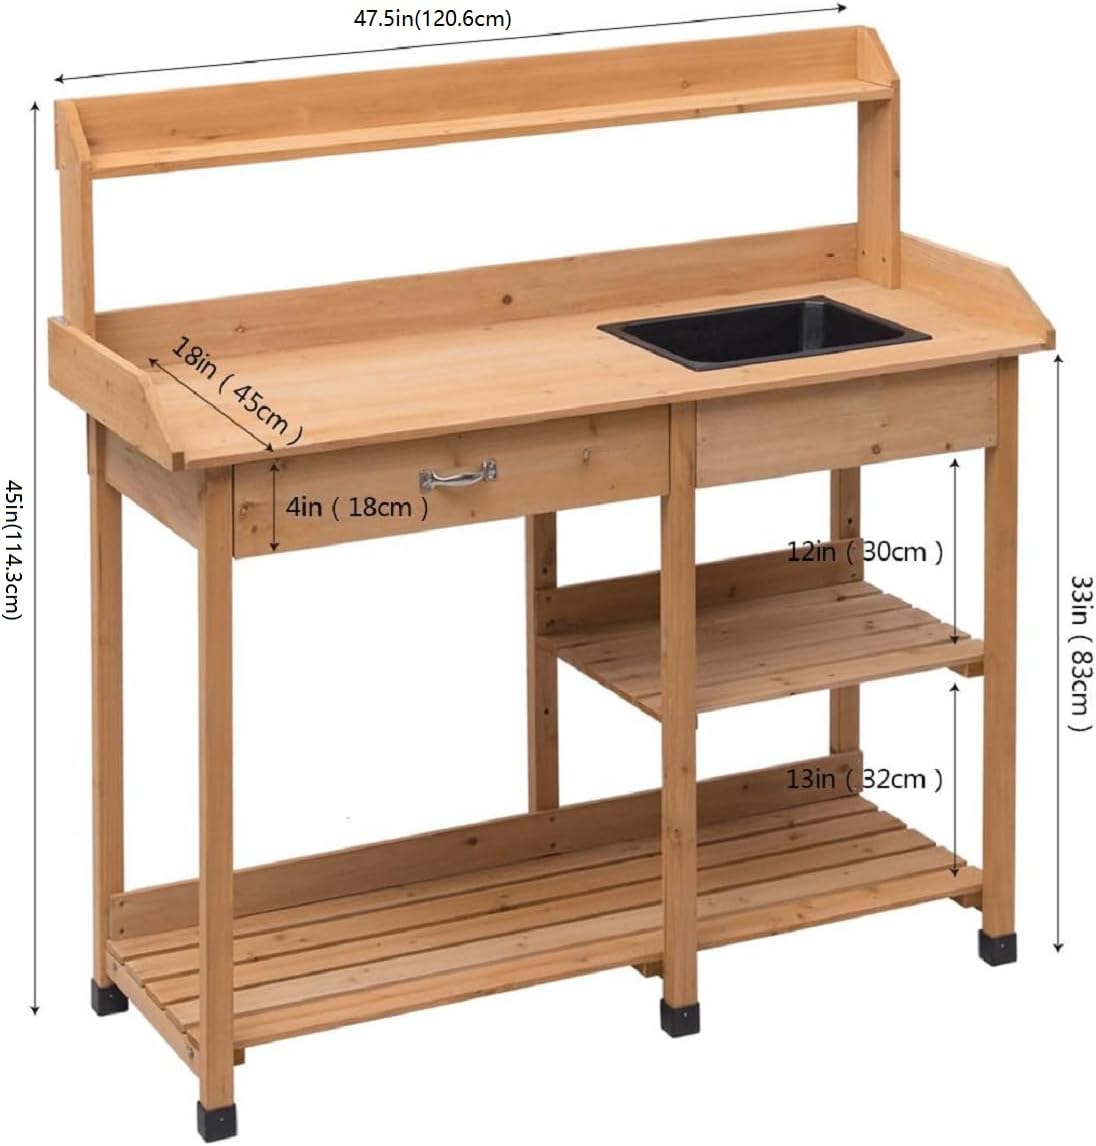 Outdoor Garden Potting Bench with Sink, Drawer, Solid Wood